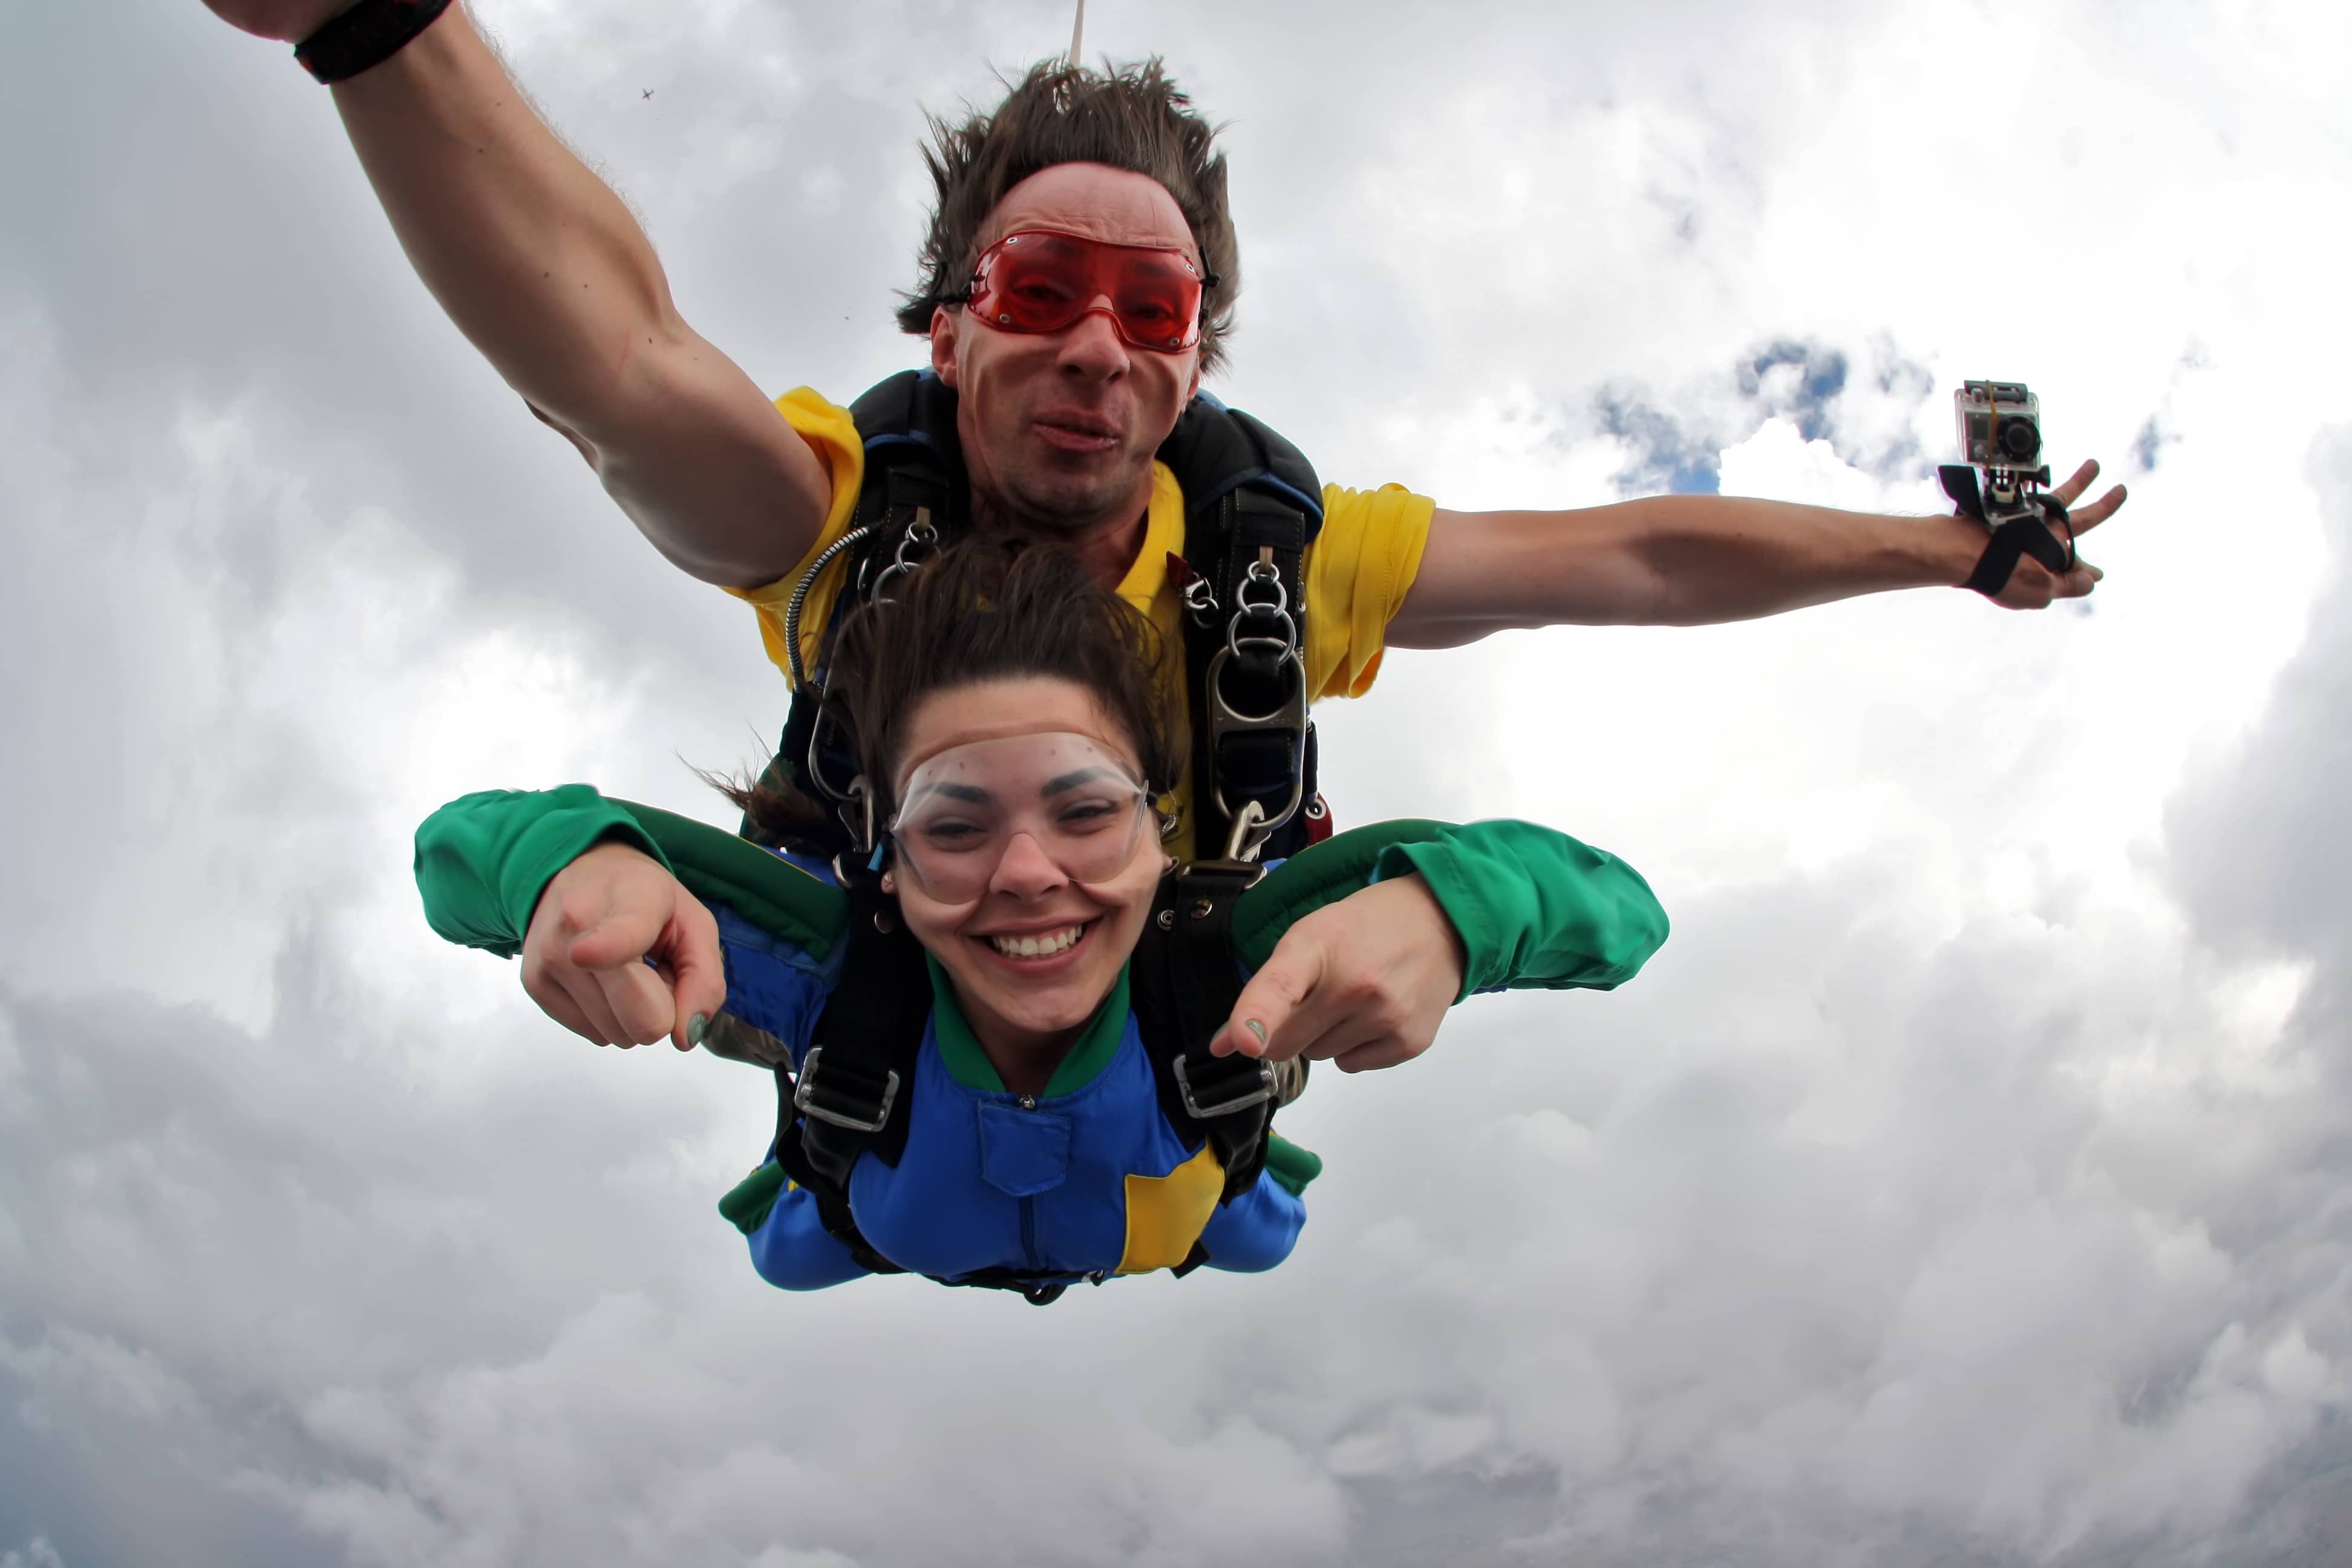 A couple getting a dose of adrenaline through skydiving.